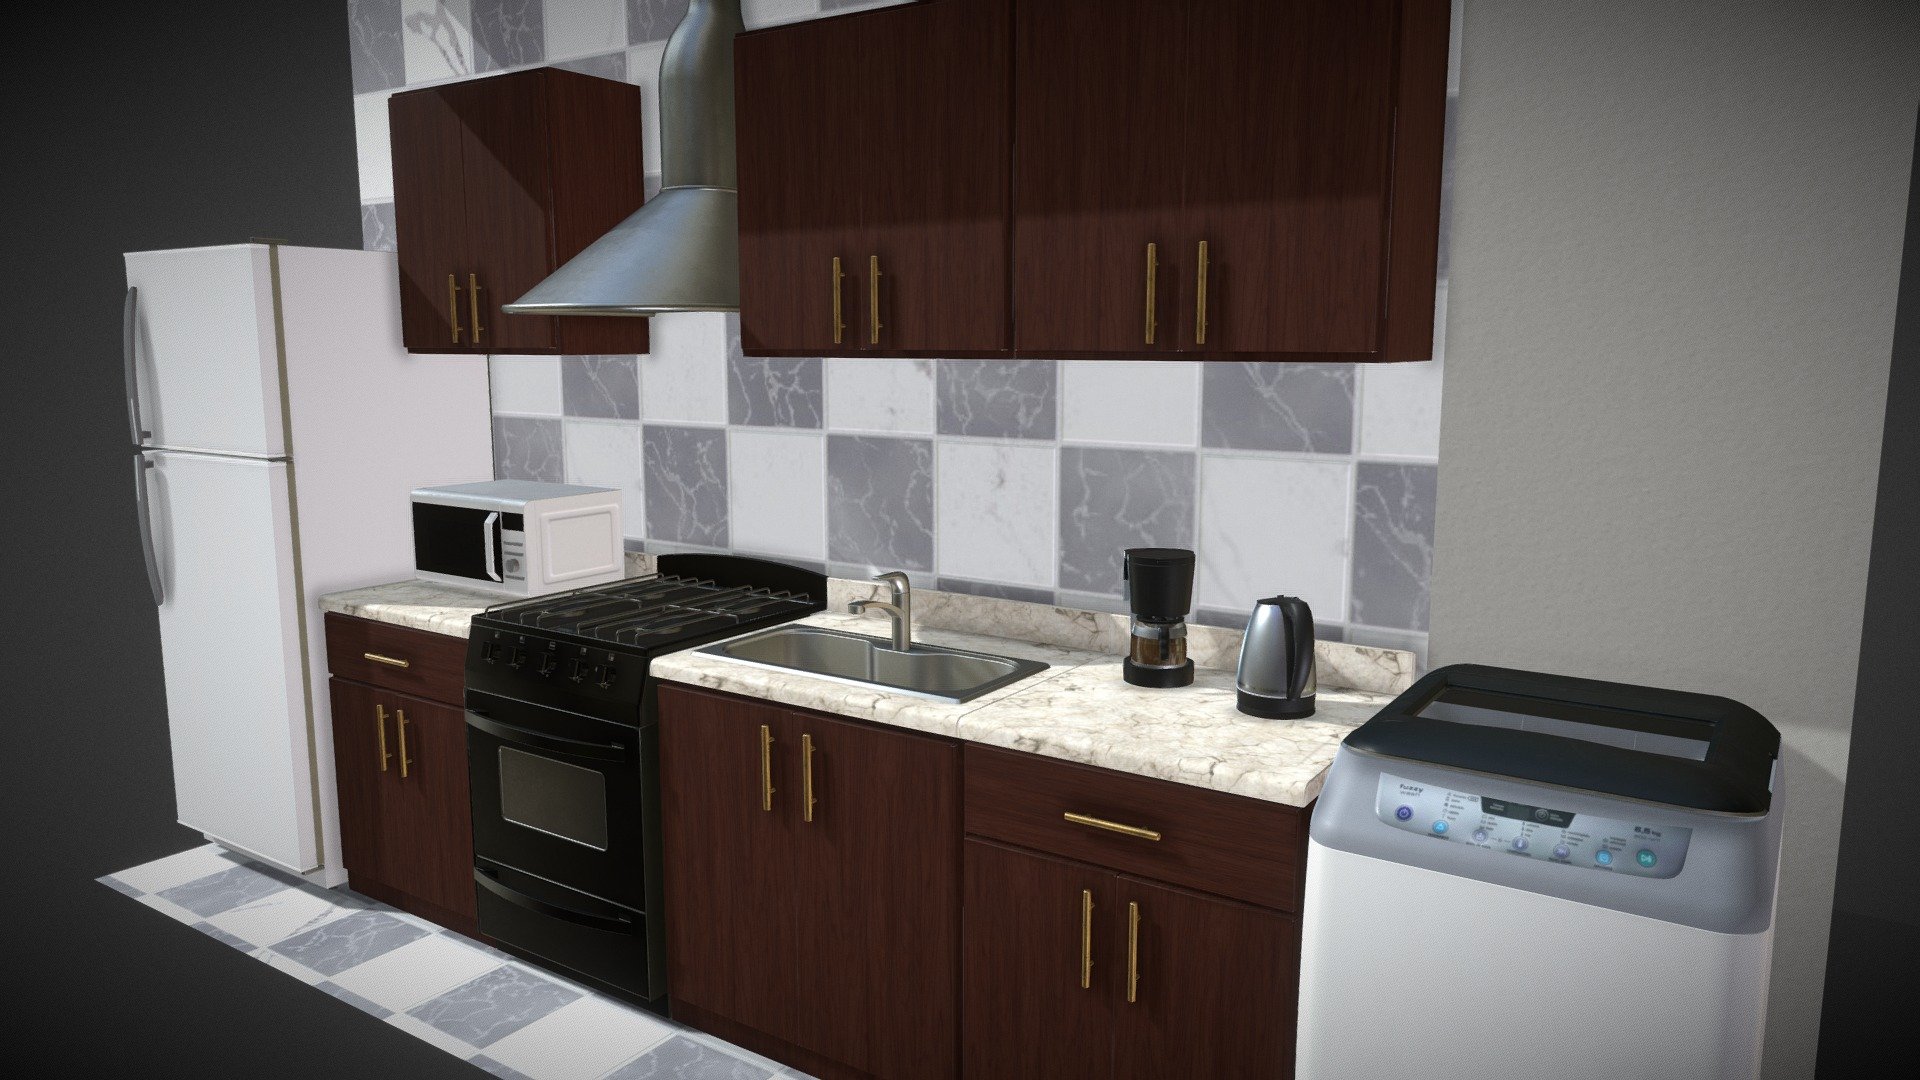 Integral kitchen: furniture, countertop, appliances, etc.

-LOW POLY It contains a .rar with the asset in .fbx format, with 13 material and textures in x2048 .jpg - Color - Metalic - Normal map - Roughness.

-Number of vertices 25,312.

-Real-world scaled model.

-Ready for game or stage adornment 3d model